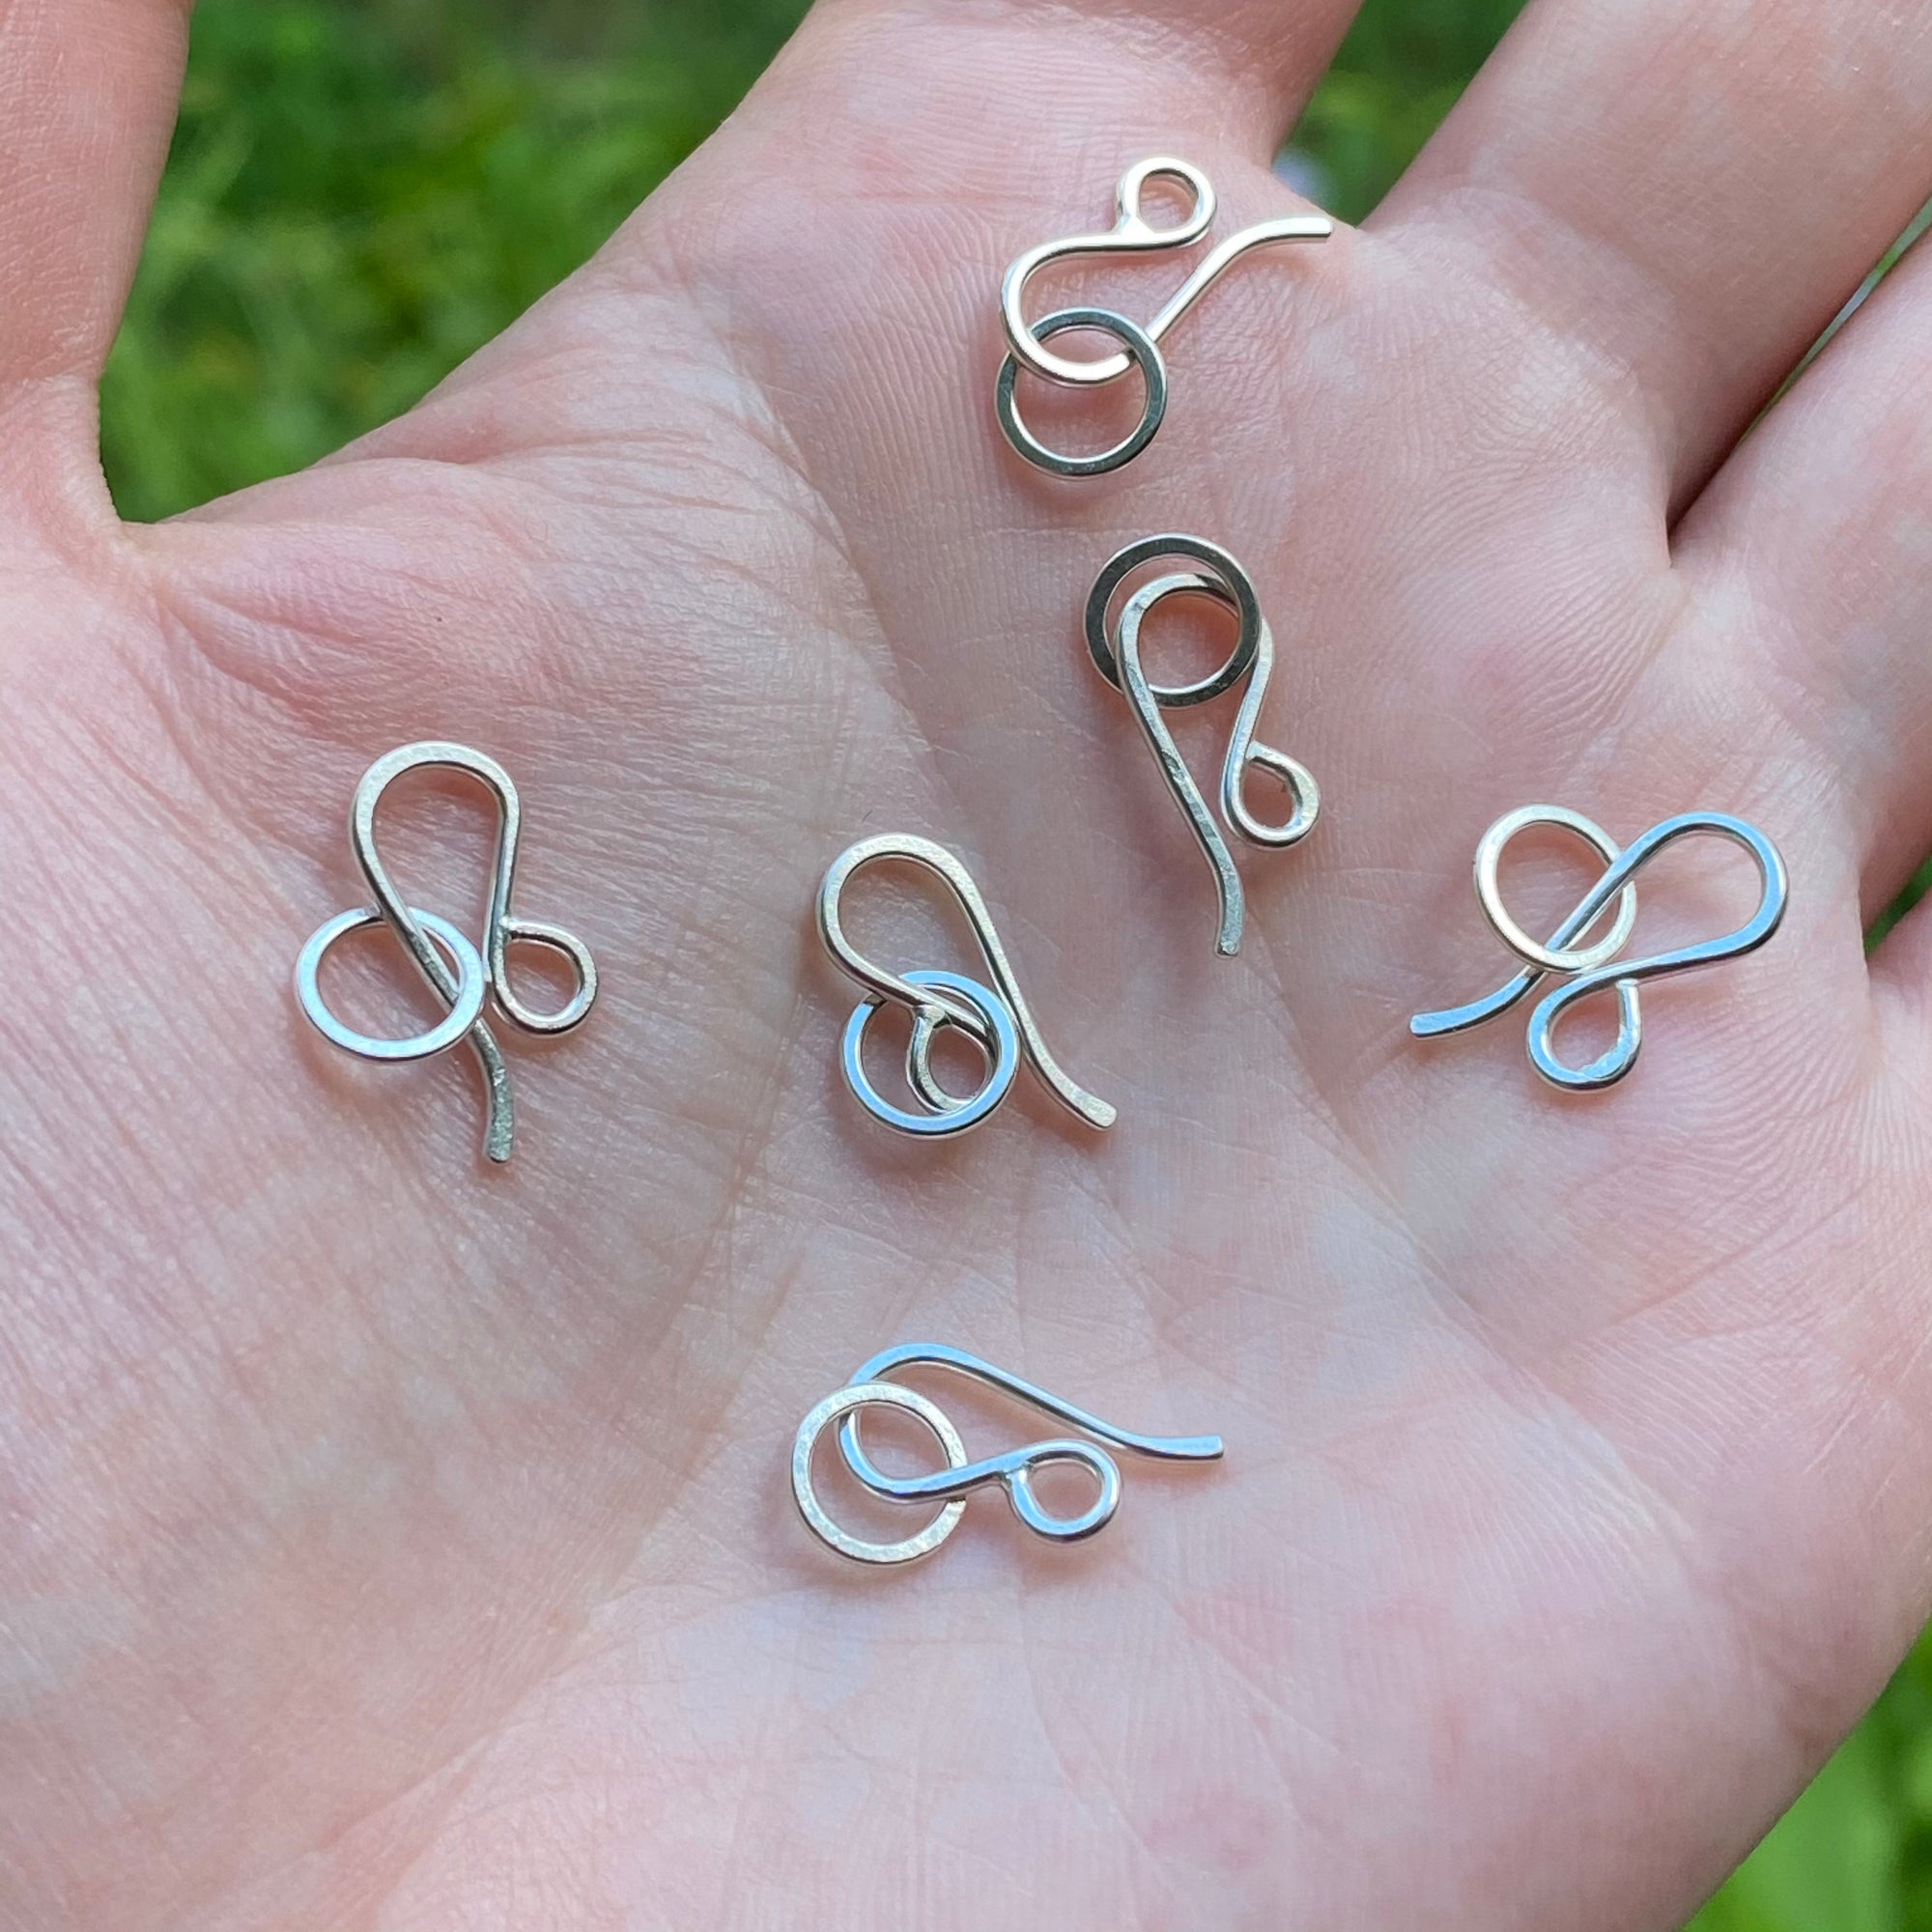 How To Add Eye Hooks For Jewelry 